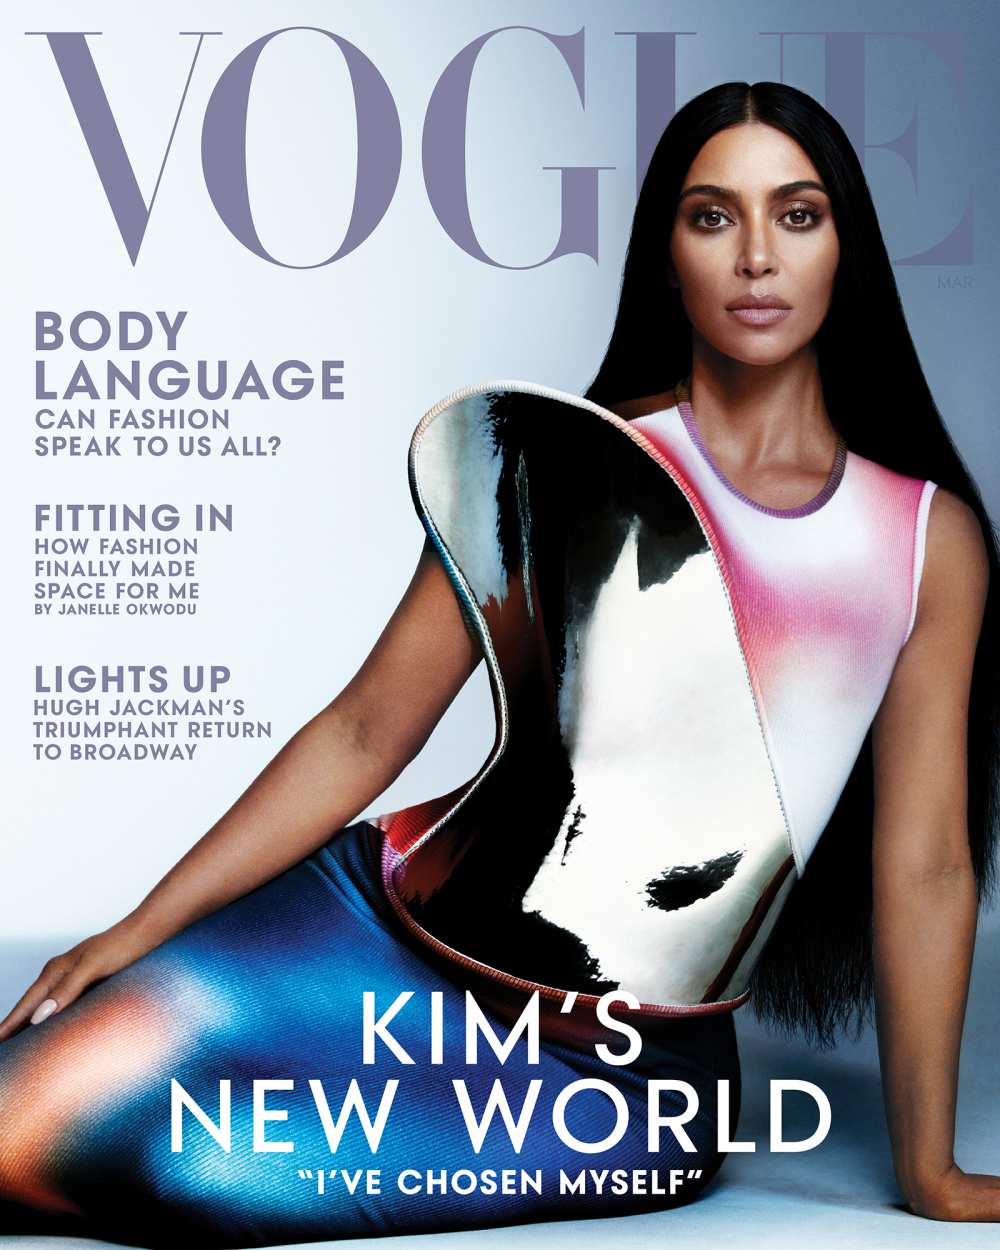 Kim Kardashian Reveals Daughter North West Was the Stylist for Her ‘Vogue’ Photo Shoot